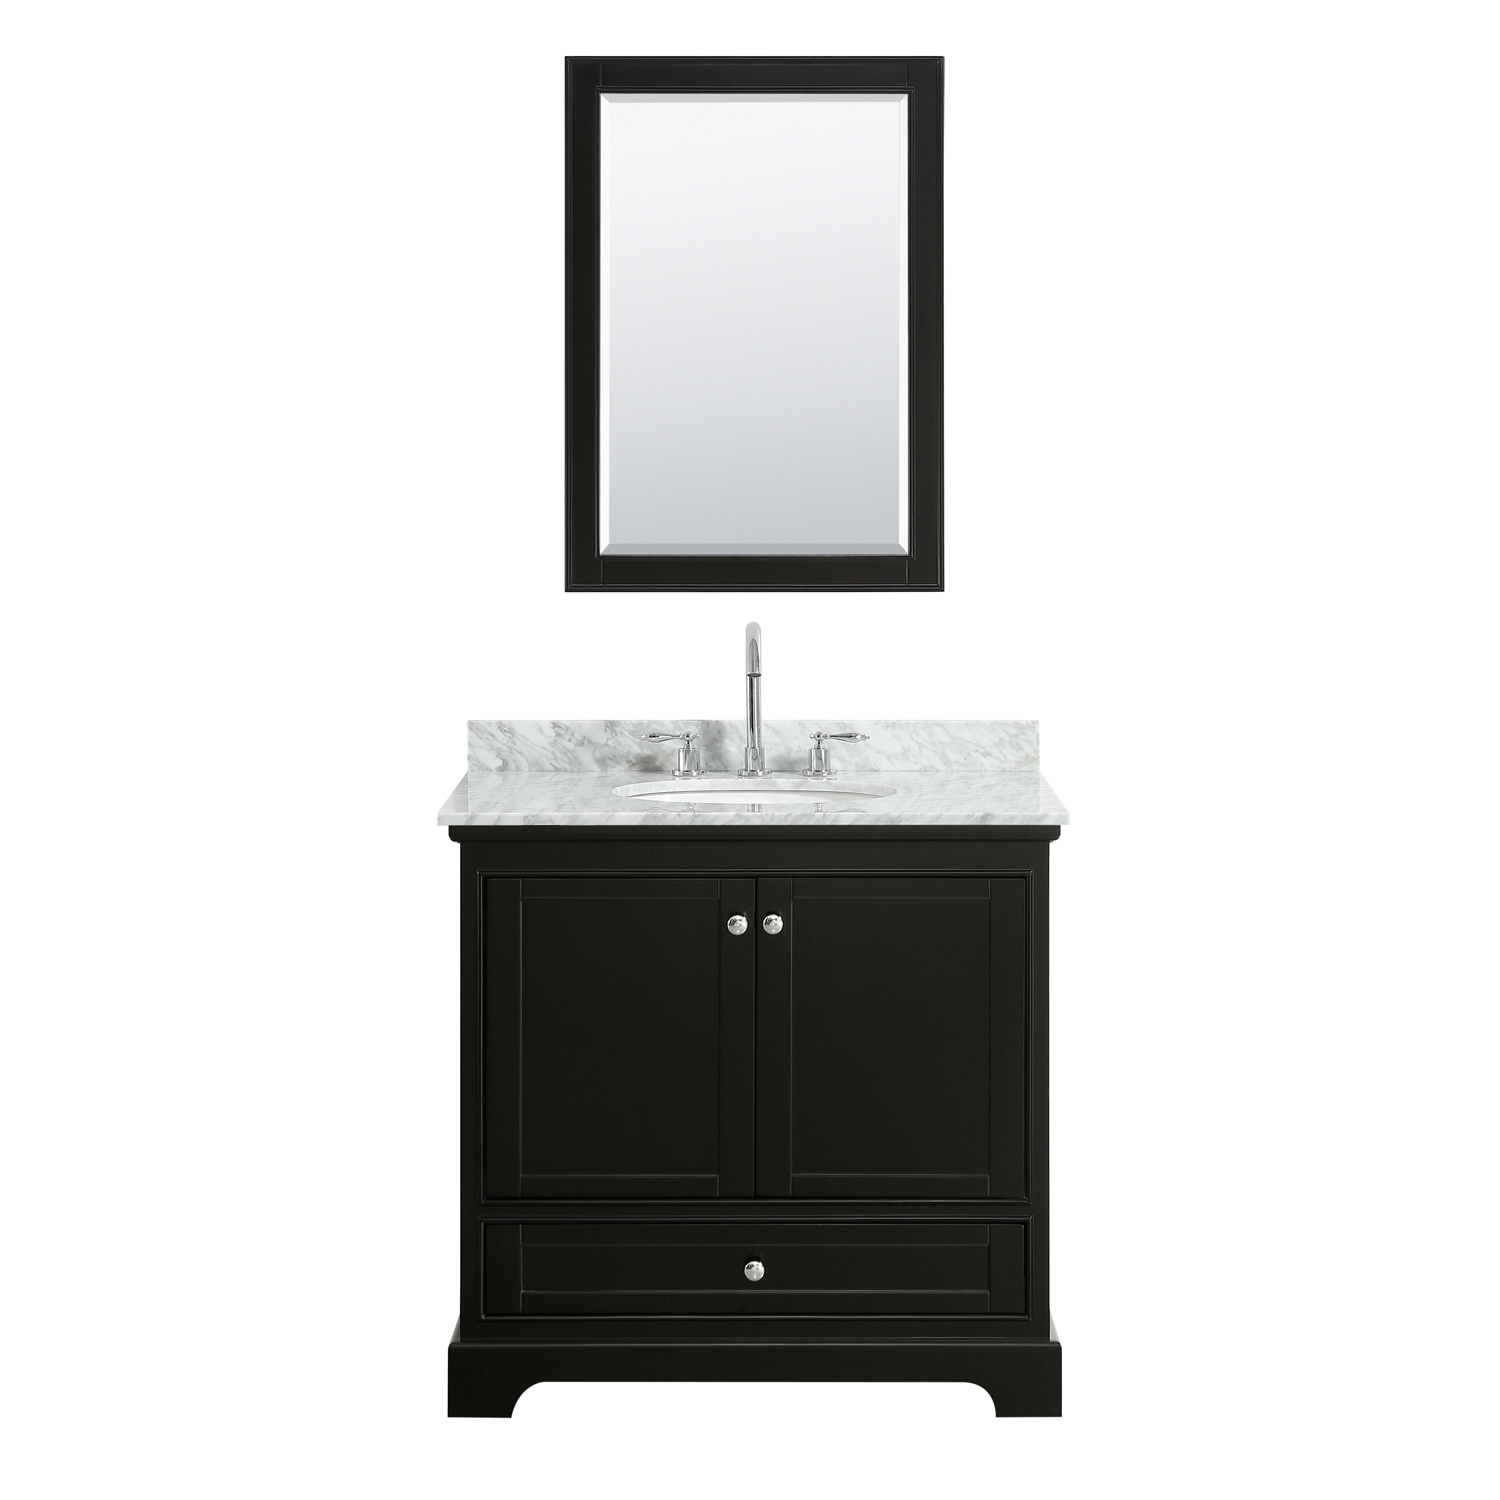 36" Single Bathroom Vanity in White Carrara Marble Countertop with Undermount Porcelain Sink, Medicine Cabinet, Mirror and Color Options